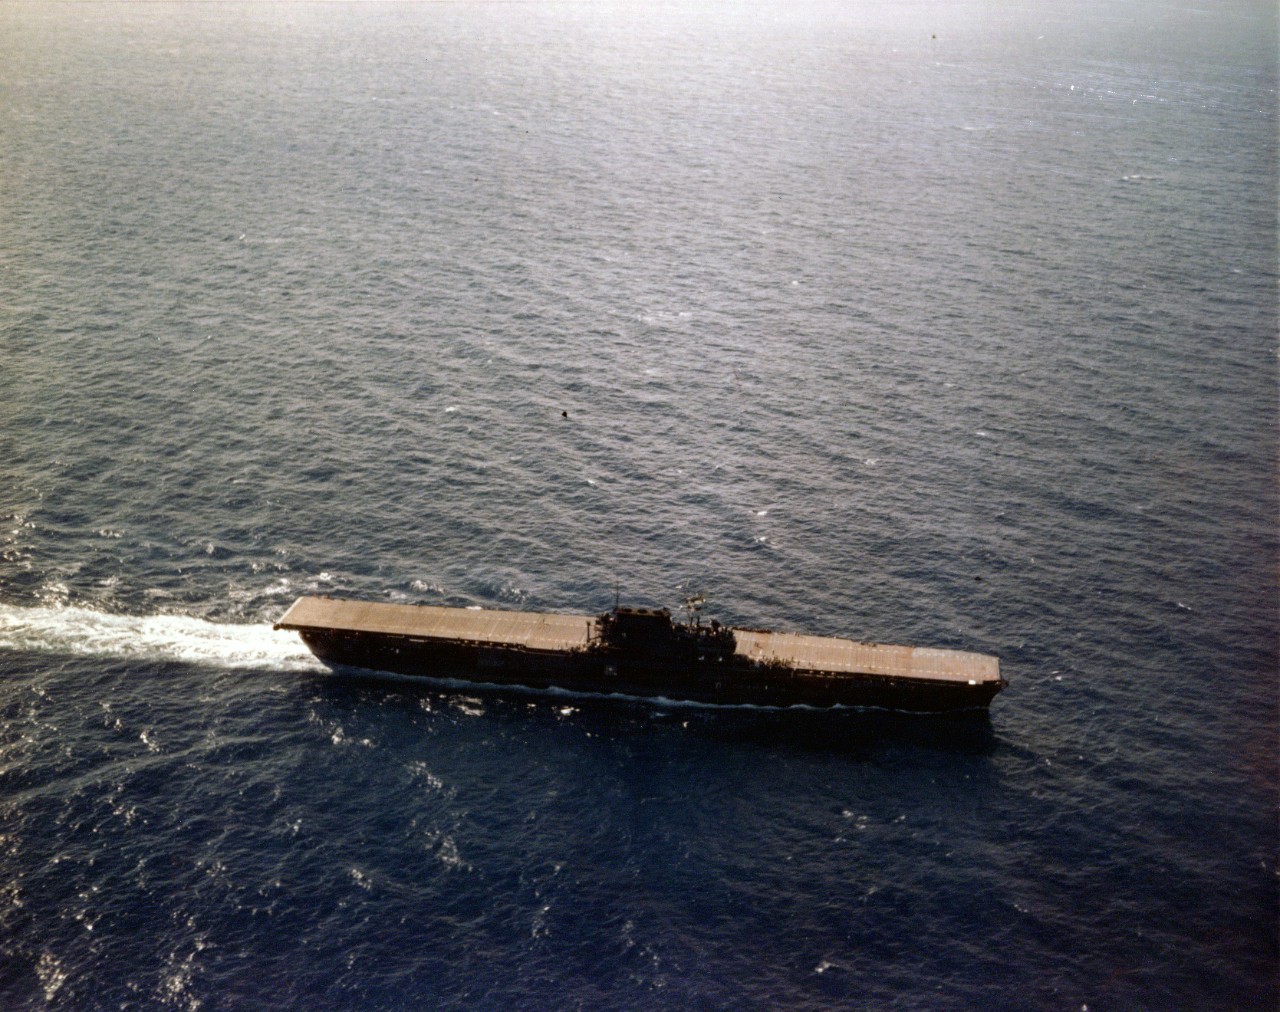 Enterprise turns into the wind to recover planes while steaming in the Pacific, circa June 1941. Note her natural wooden flight deck stain and the Measure 1 camouflage paint scheme. The following month the ships company will stain her flight deck blue in an experimental camouflage plan that will give her a unique deck stripe pattern. (U.S. Navy Photograph 80-G-K-14254, National Archives and Records Administration, Still Pictures Branch, College Park, Md.)